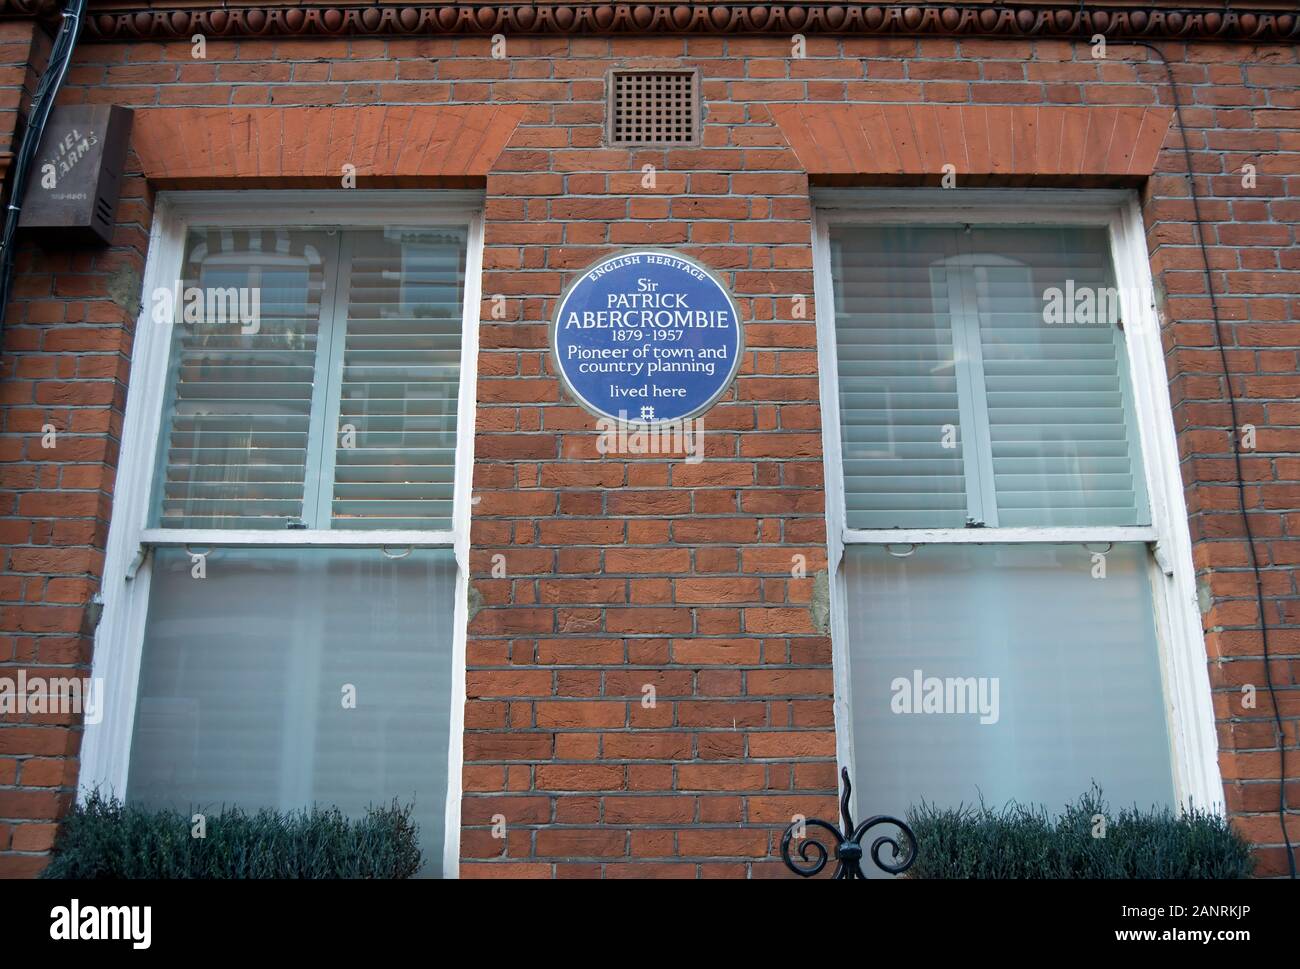 english heritage blue plaque marking a home of town and country planning pioneer, sir patrick abercrombie, south kensington, london, england Stock Photo